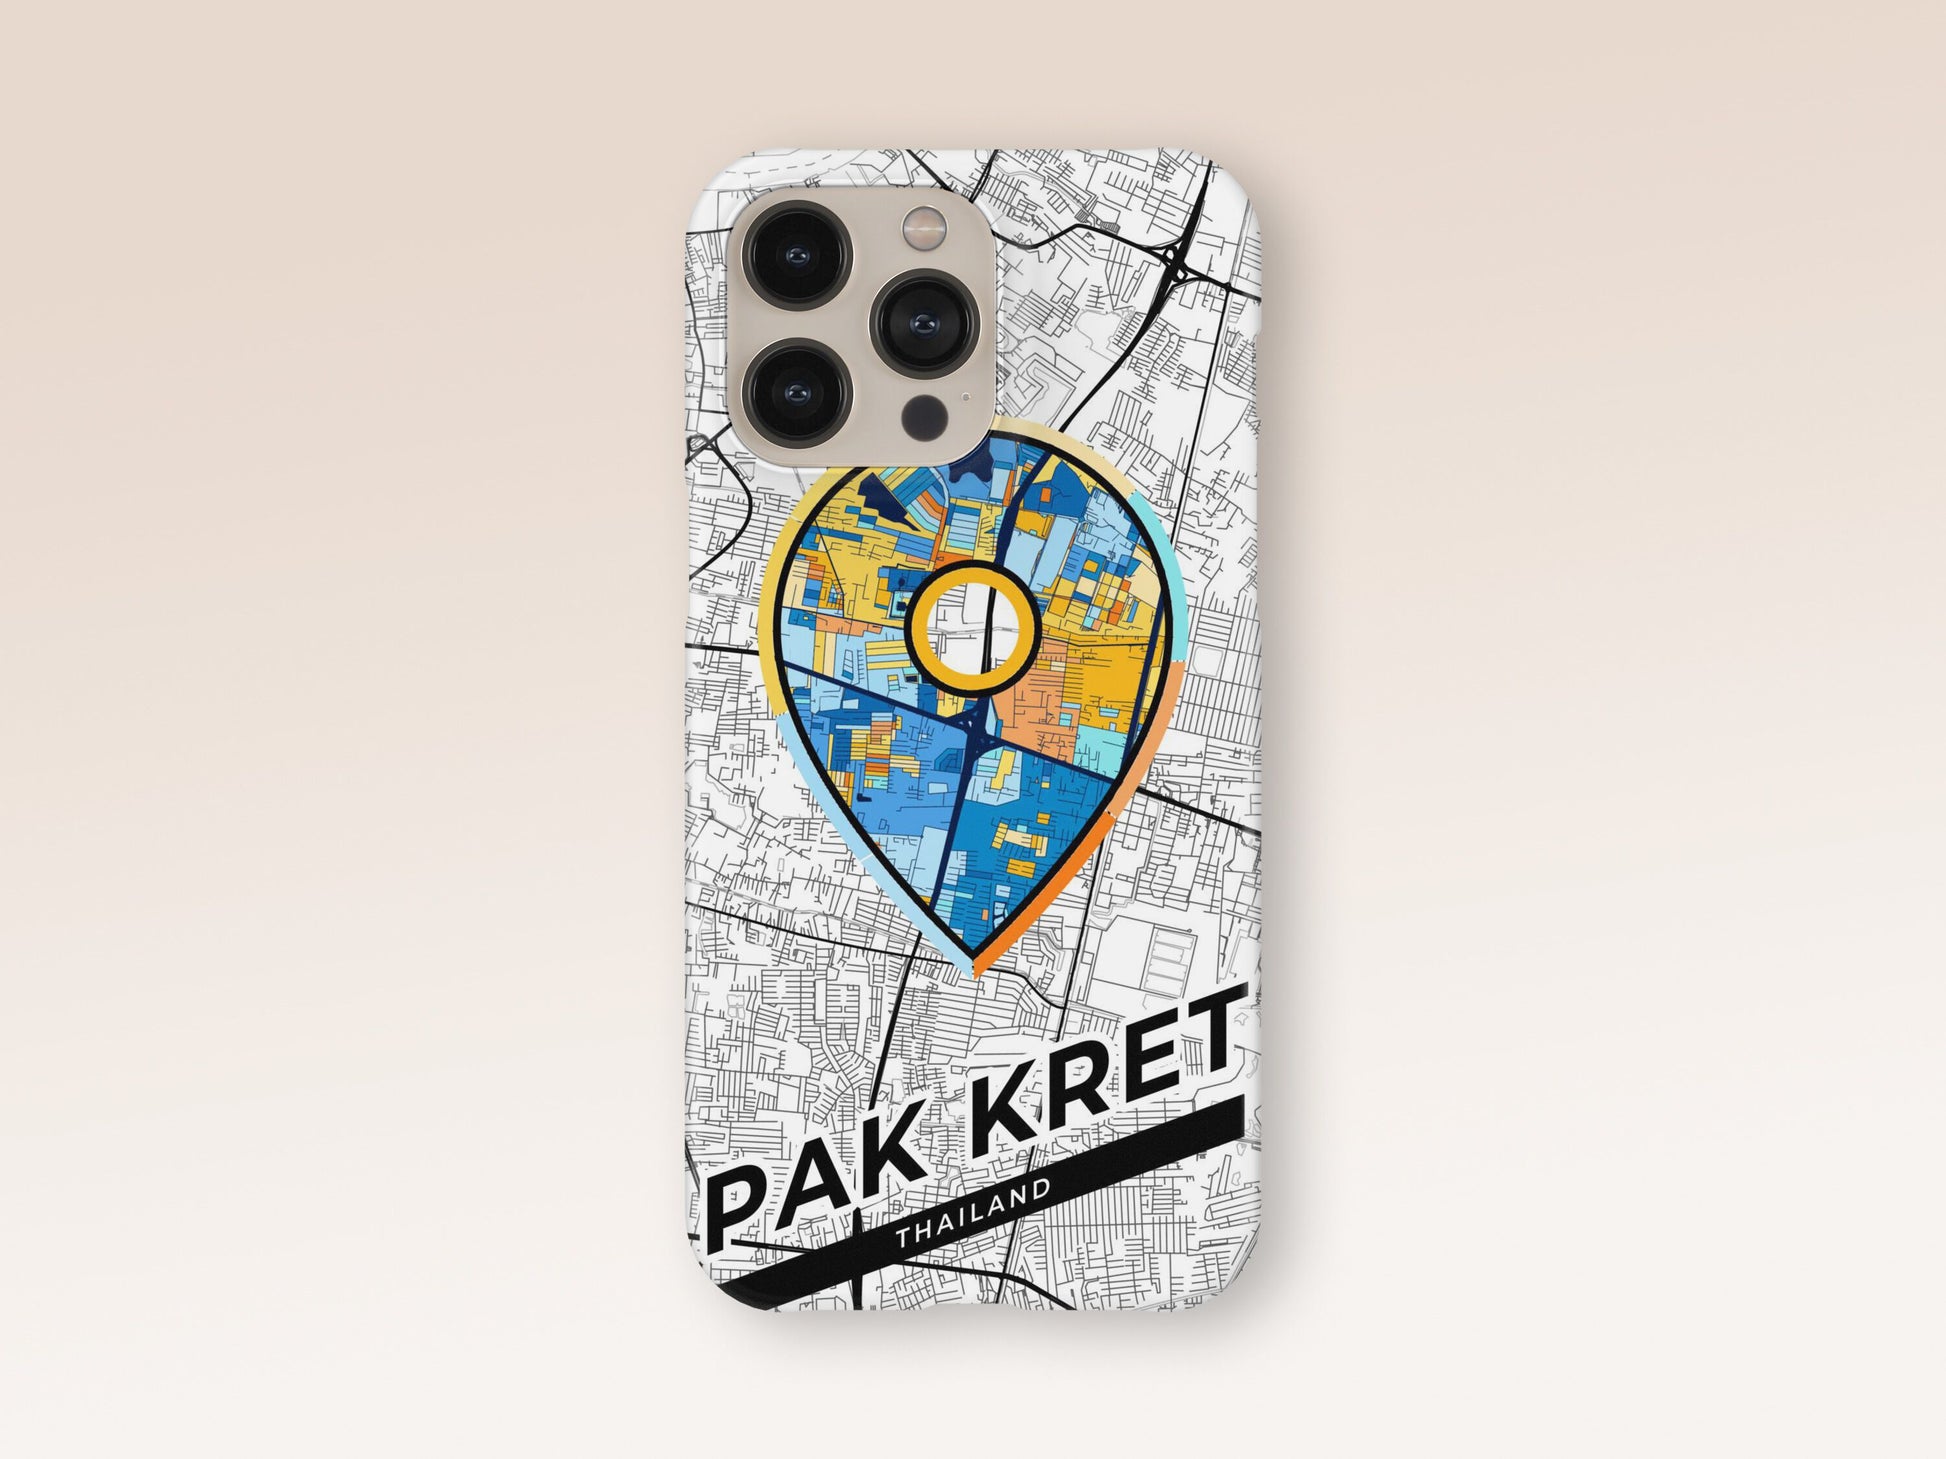 Pak Kret Thailand slim phone case with colorful icon 1